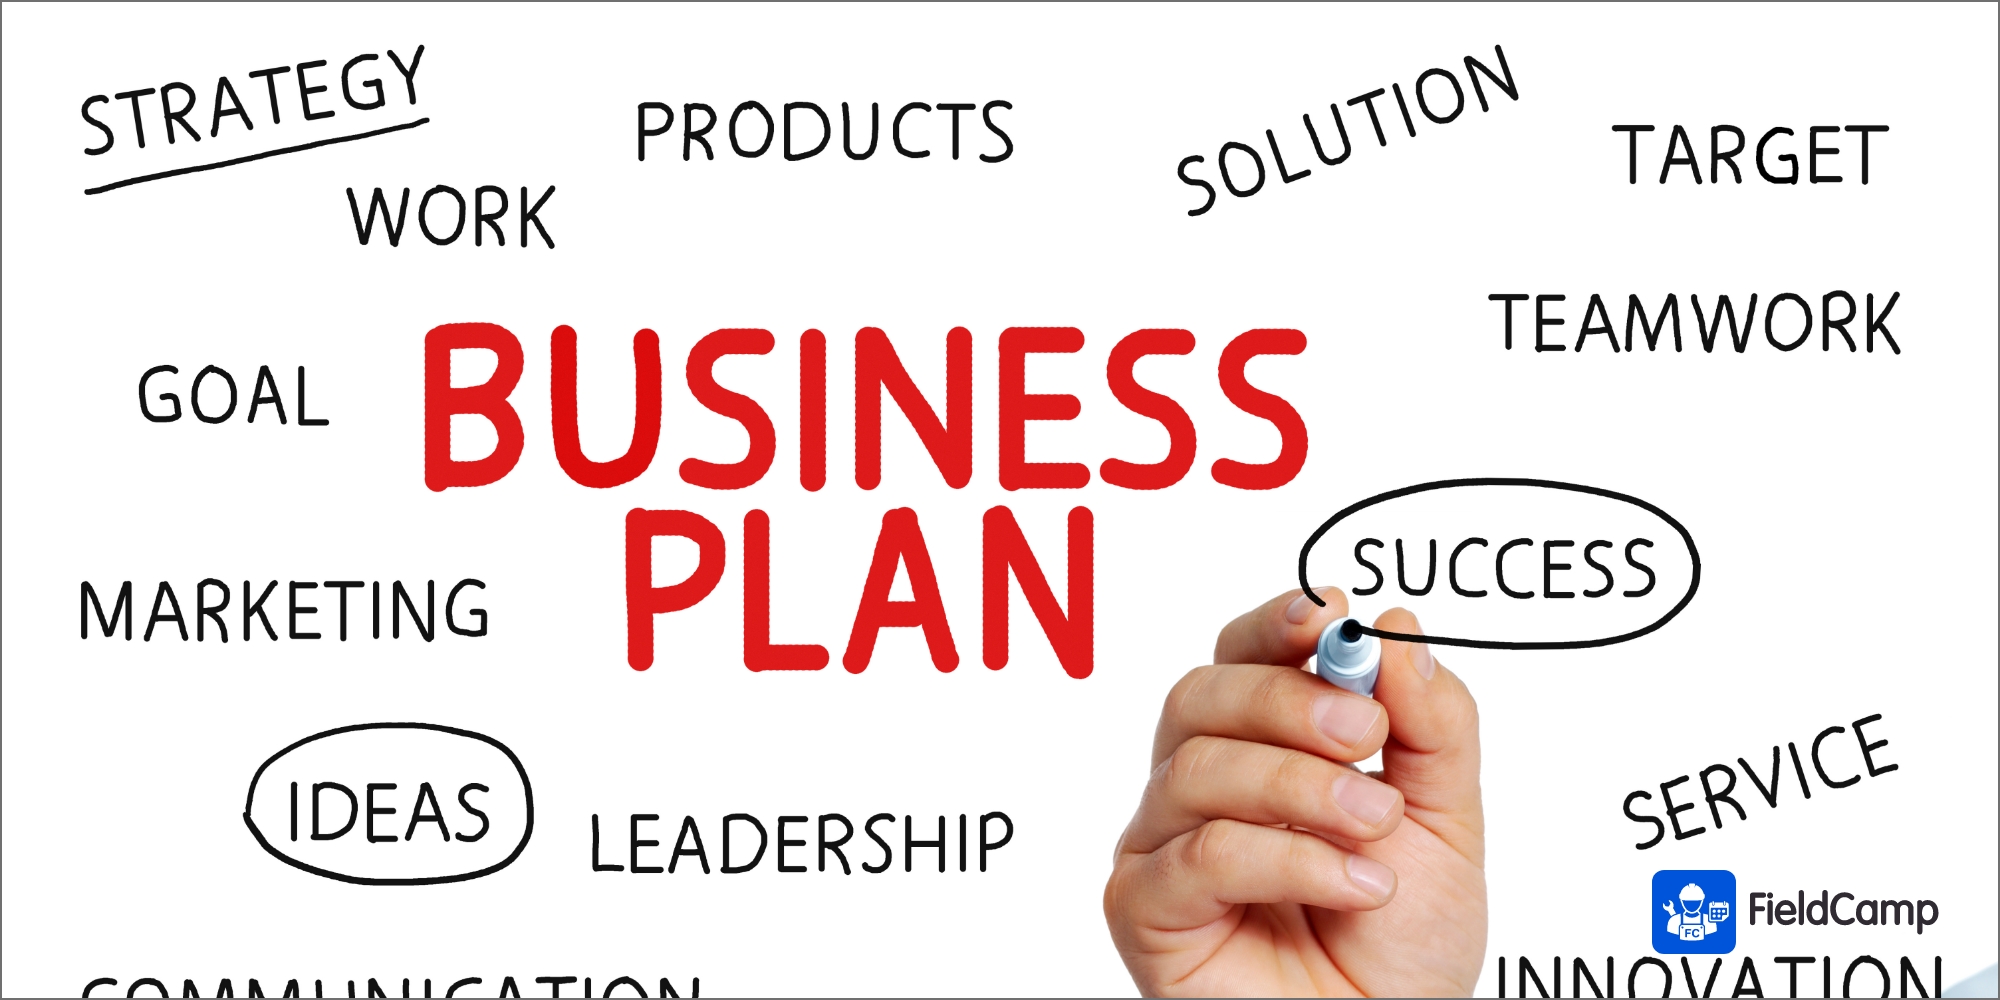 Prepare a business plan to start a service business